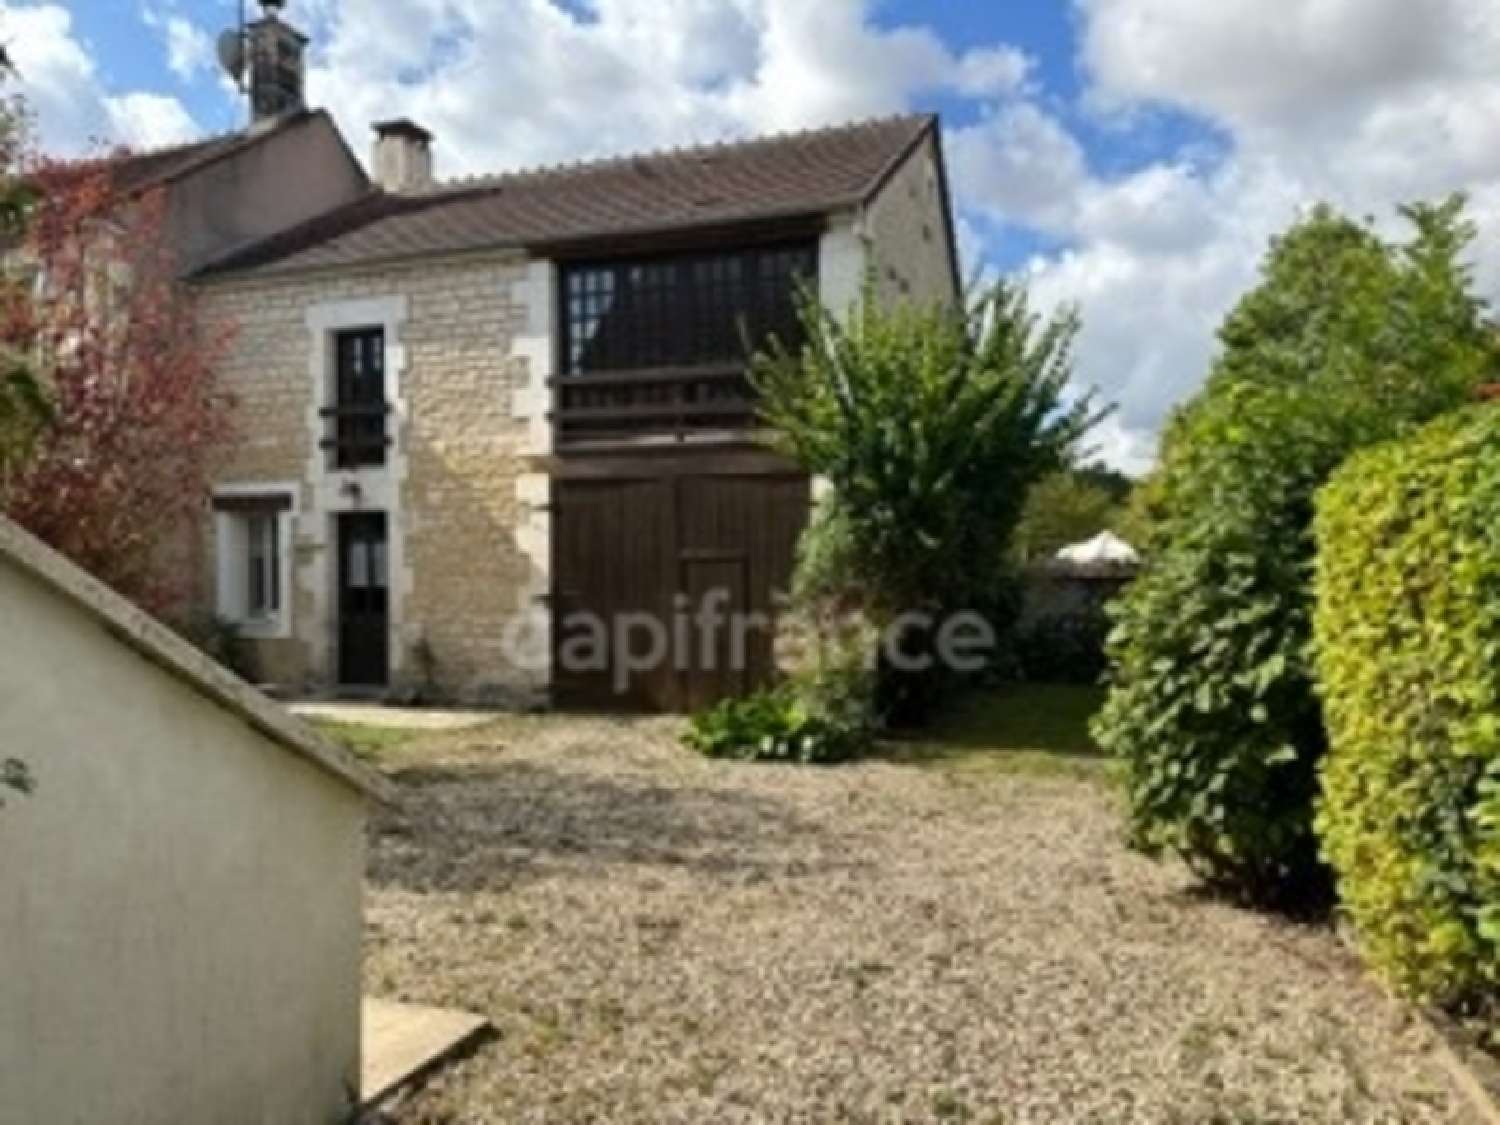  for sale house Charentenay Yonne 2